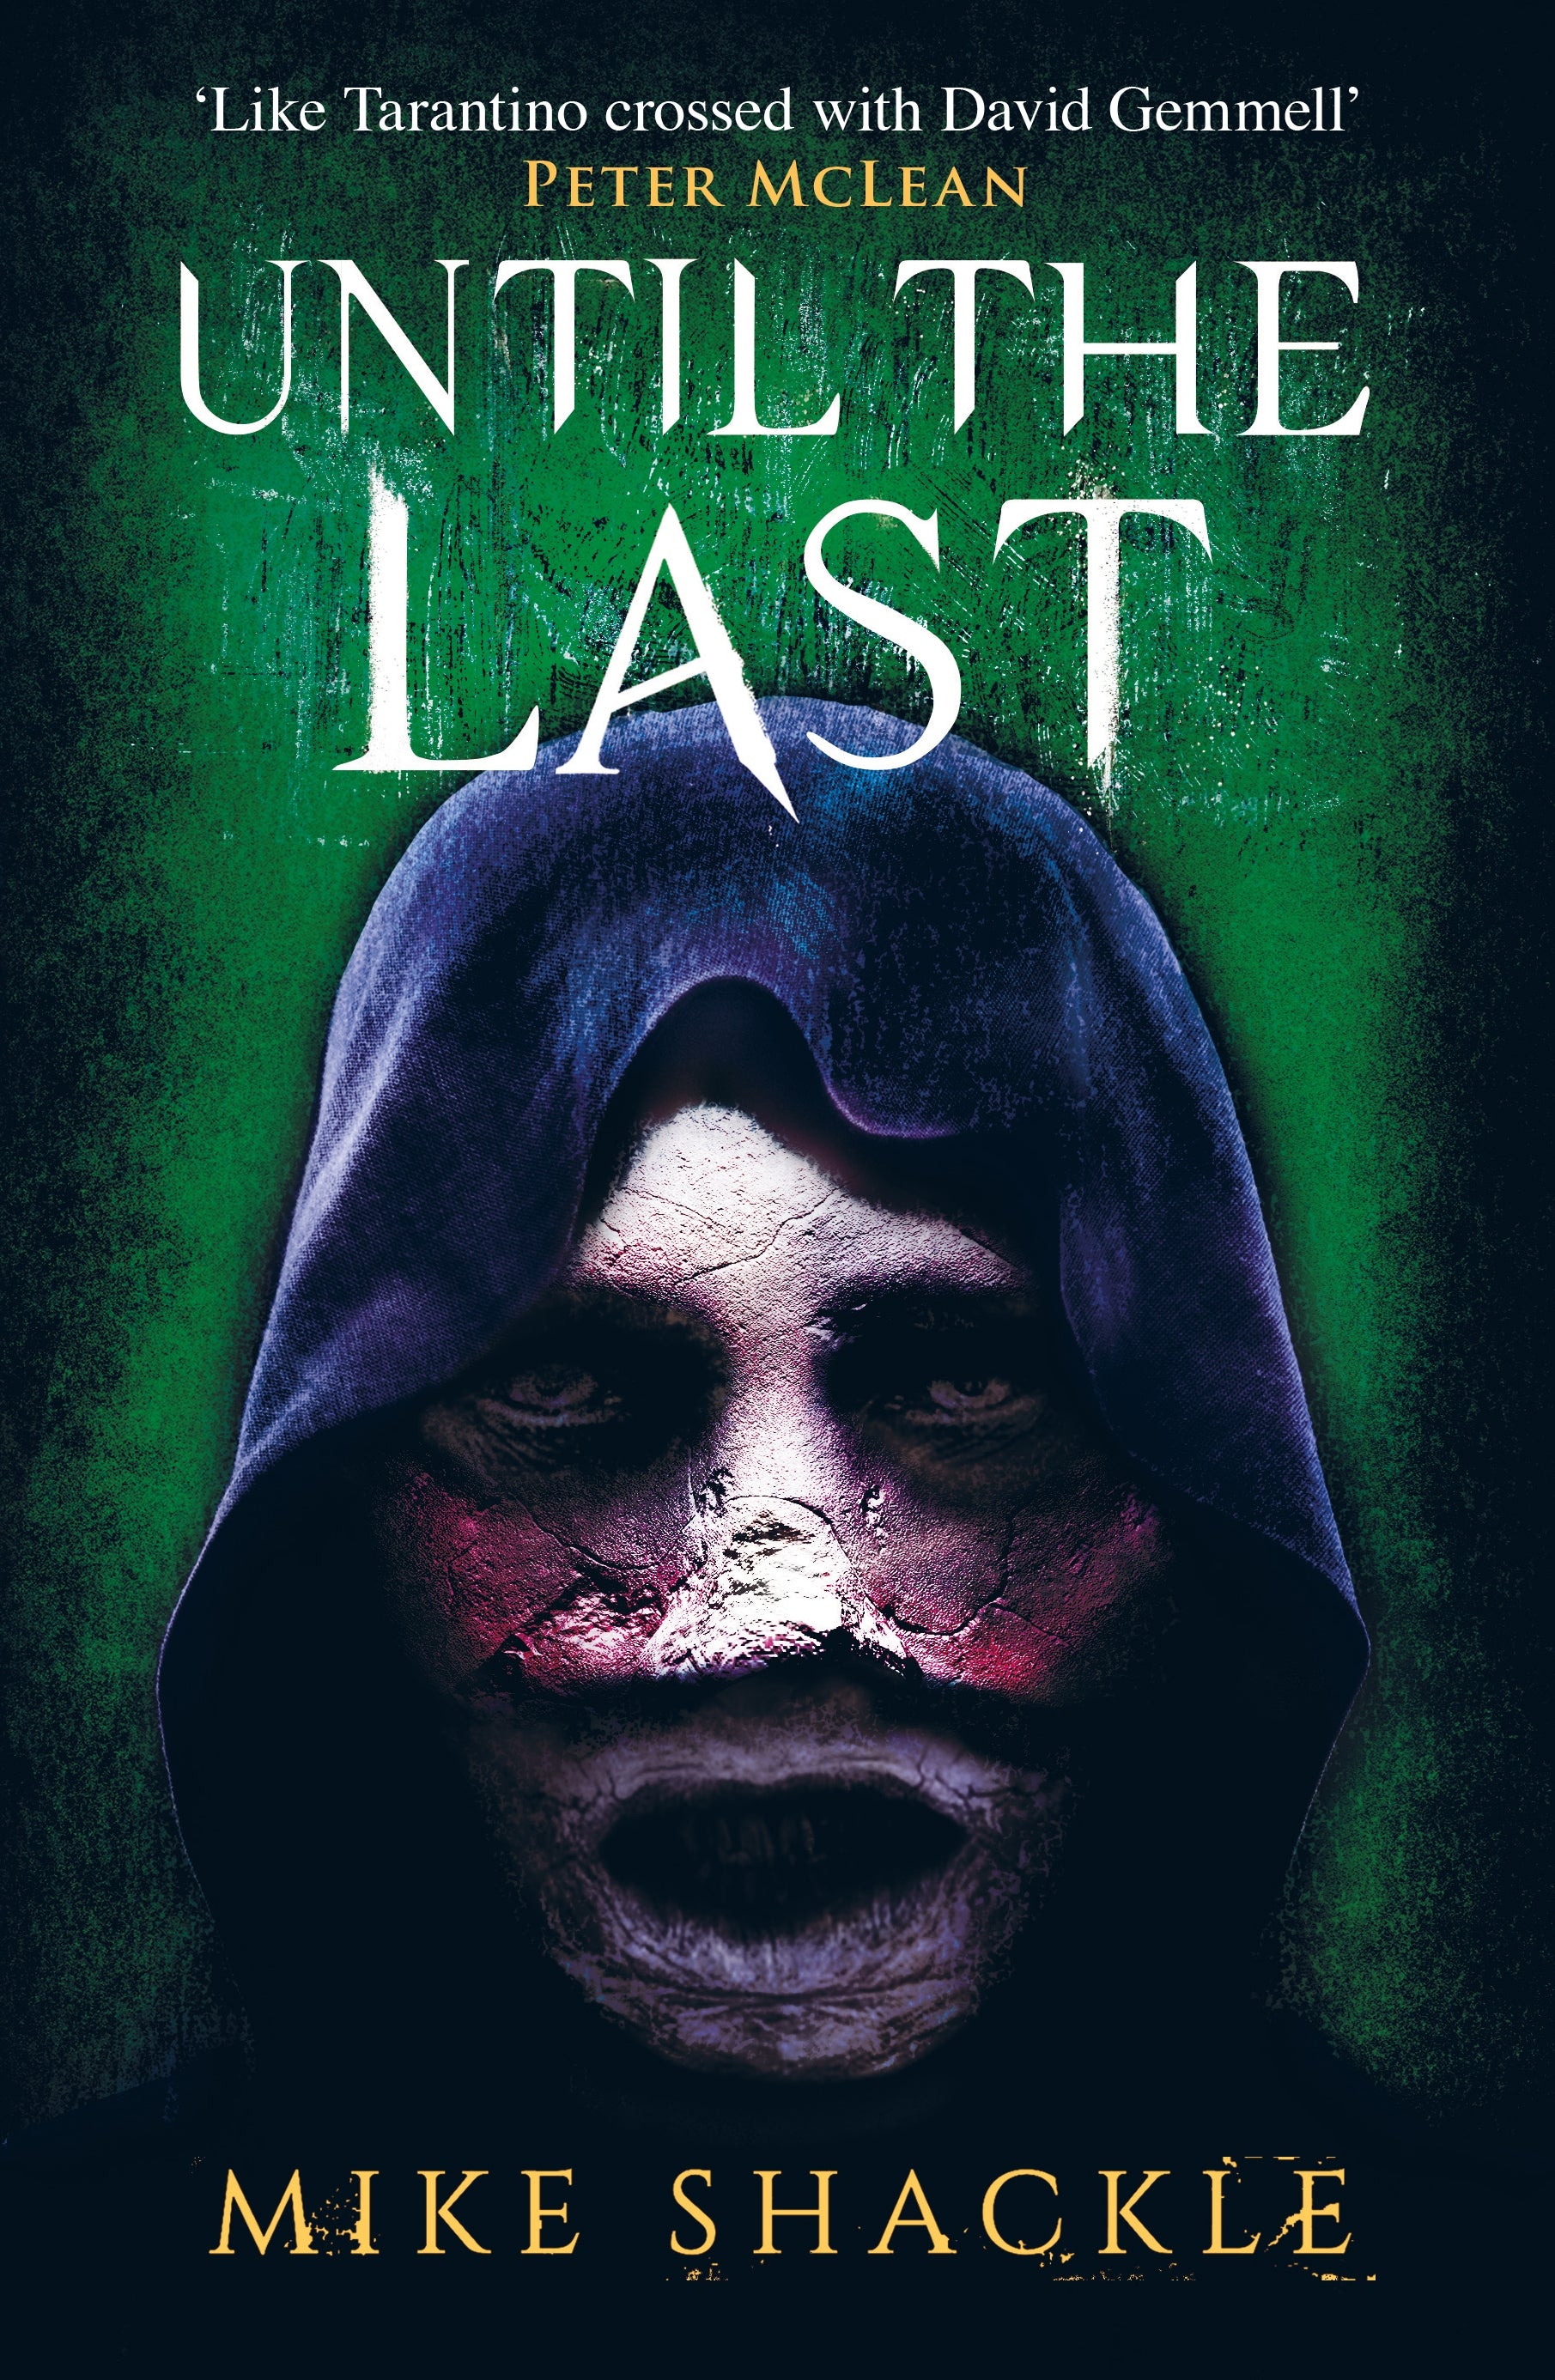 Until the Last by Mike Shackle